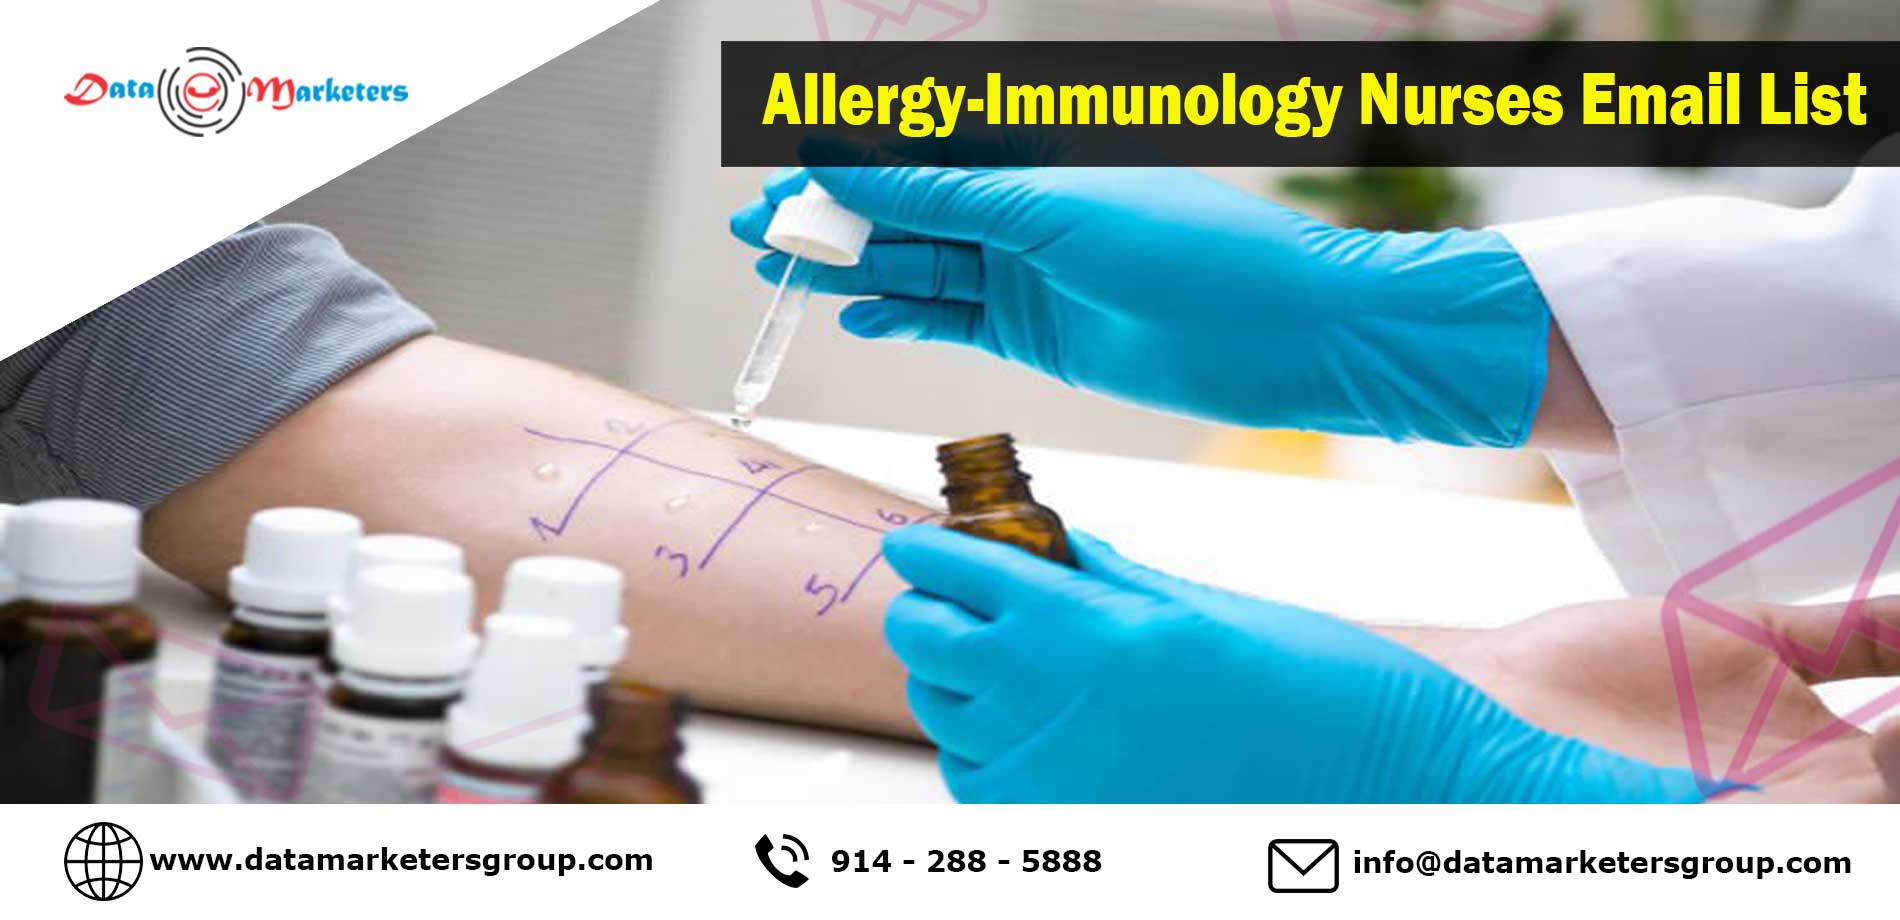 AllergyImmunology Nurses Email List Data Marketers Group